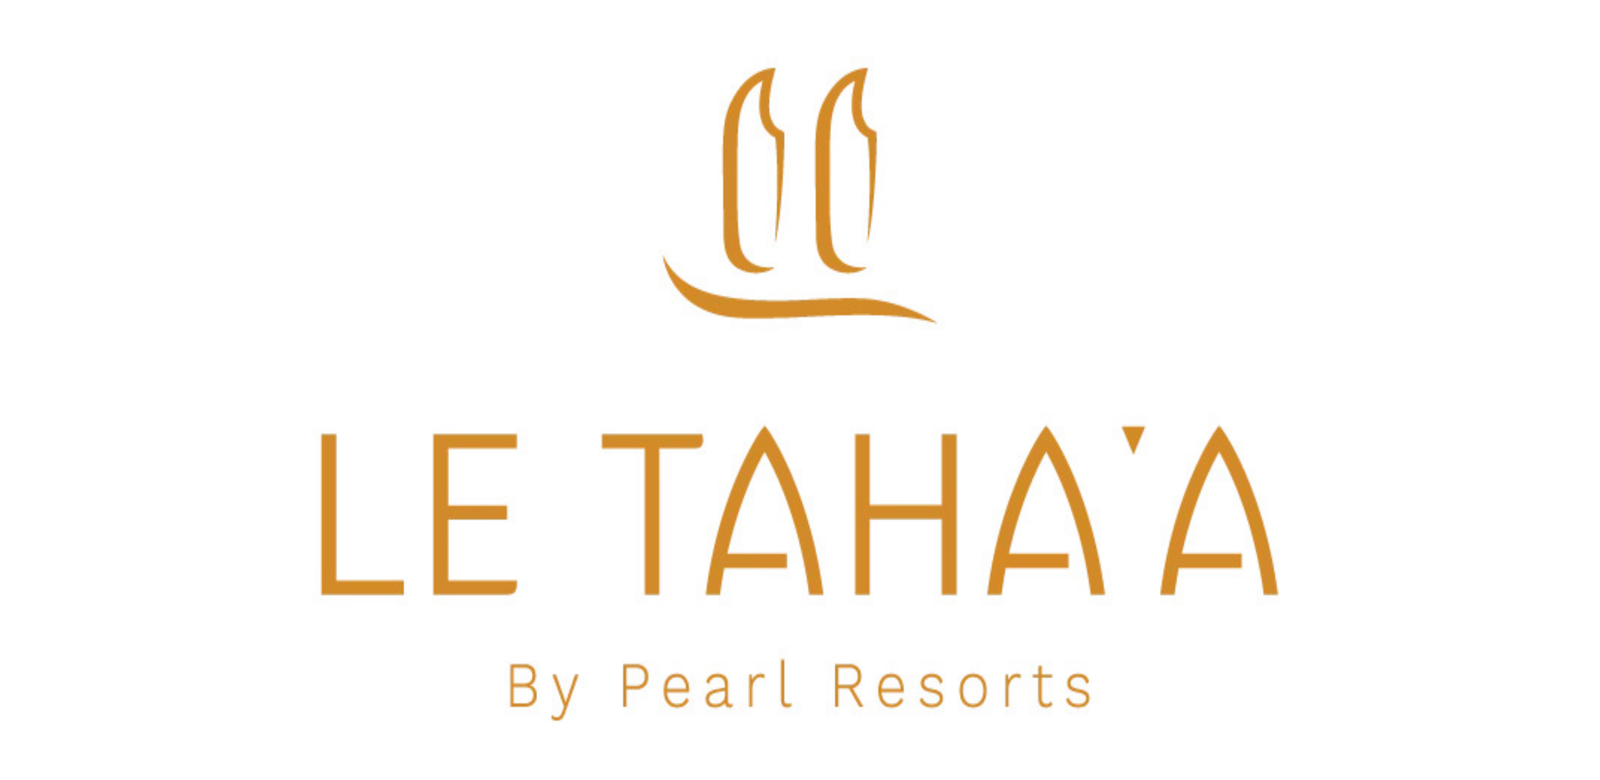 You are currently viewing Le Taha’a by Pearl Resorts